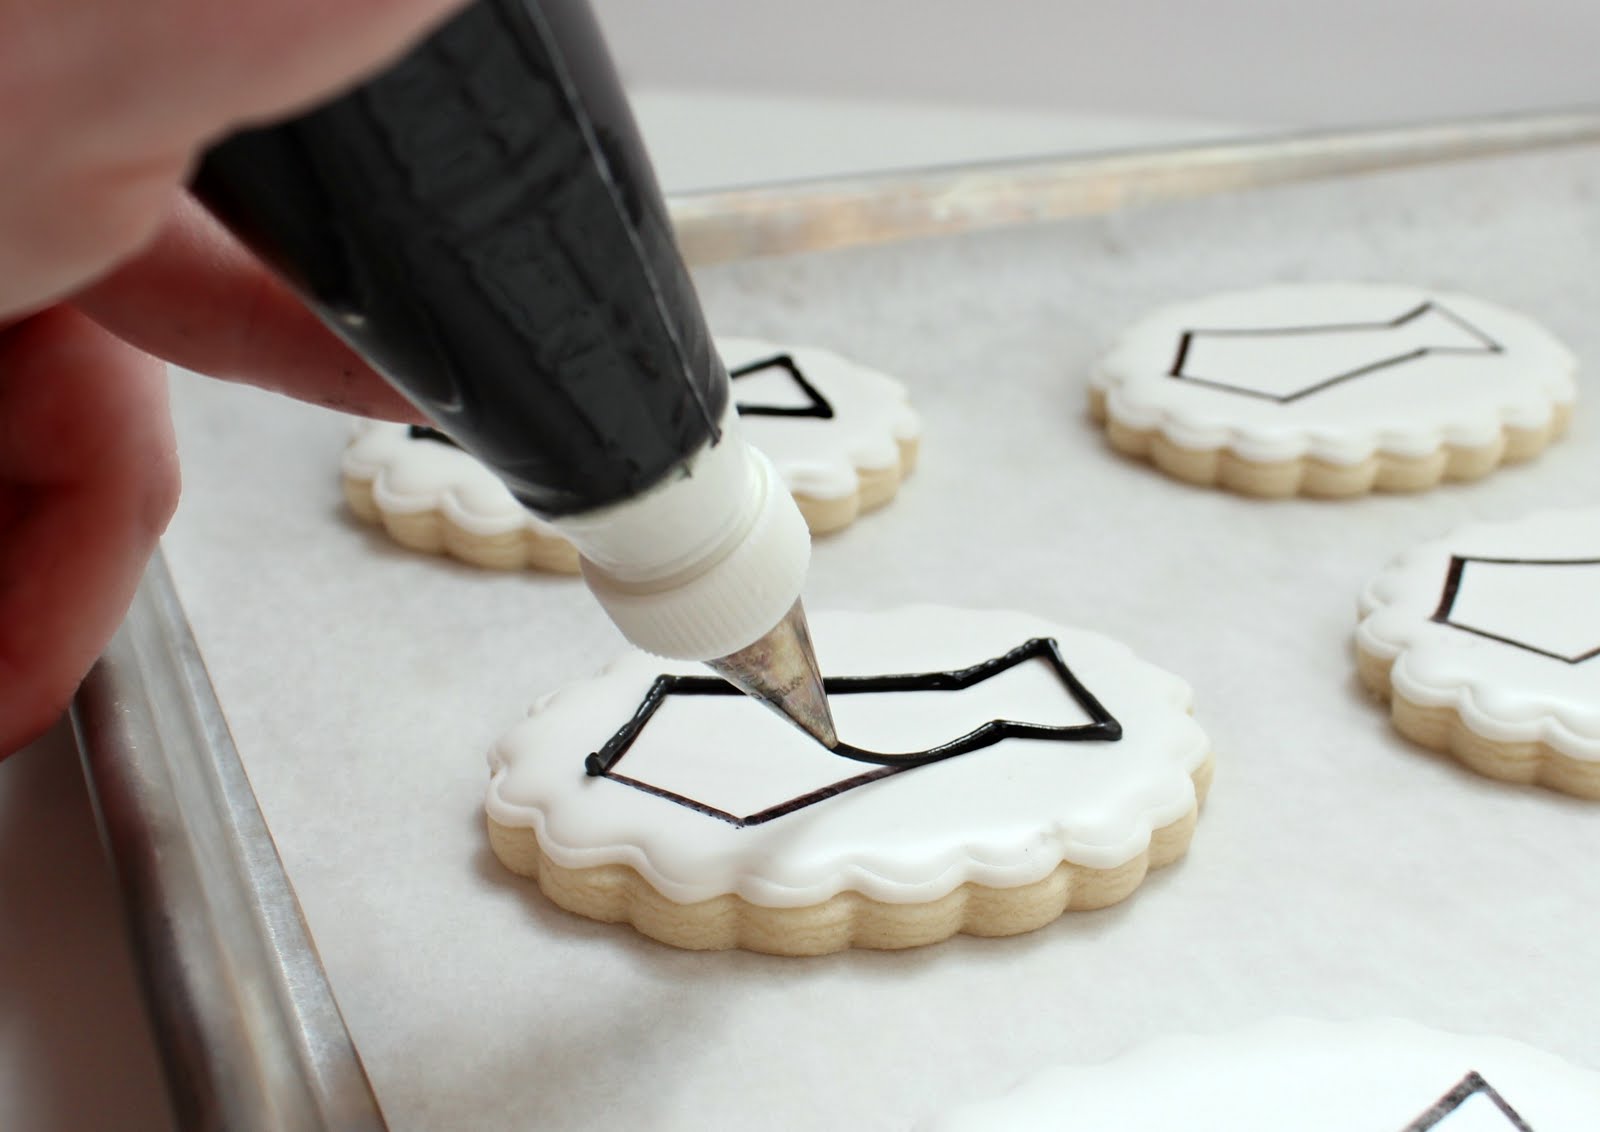 Stenciling Is My Favorite Way to Decorate Baked Goods